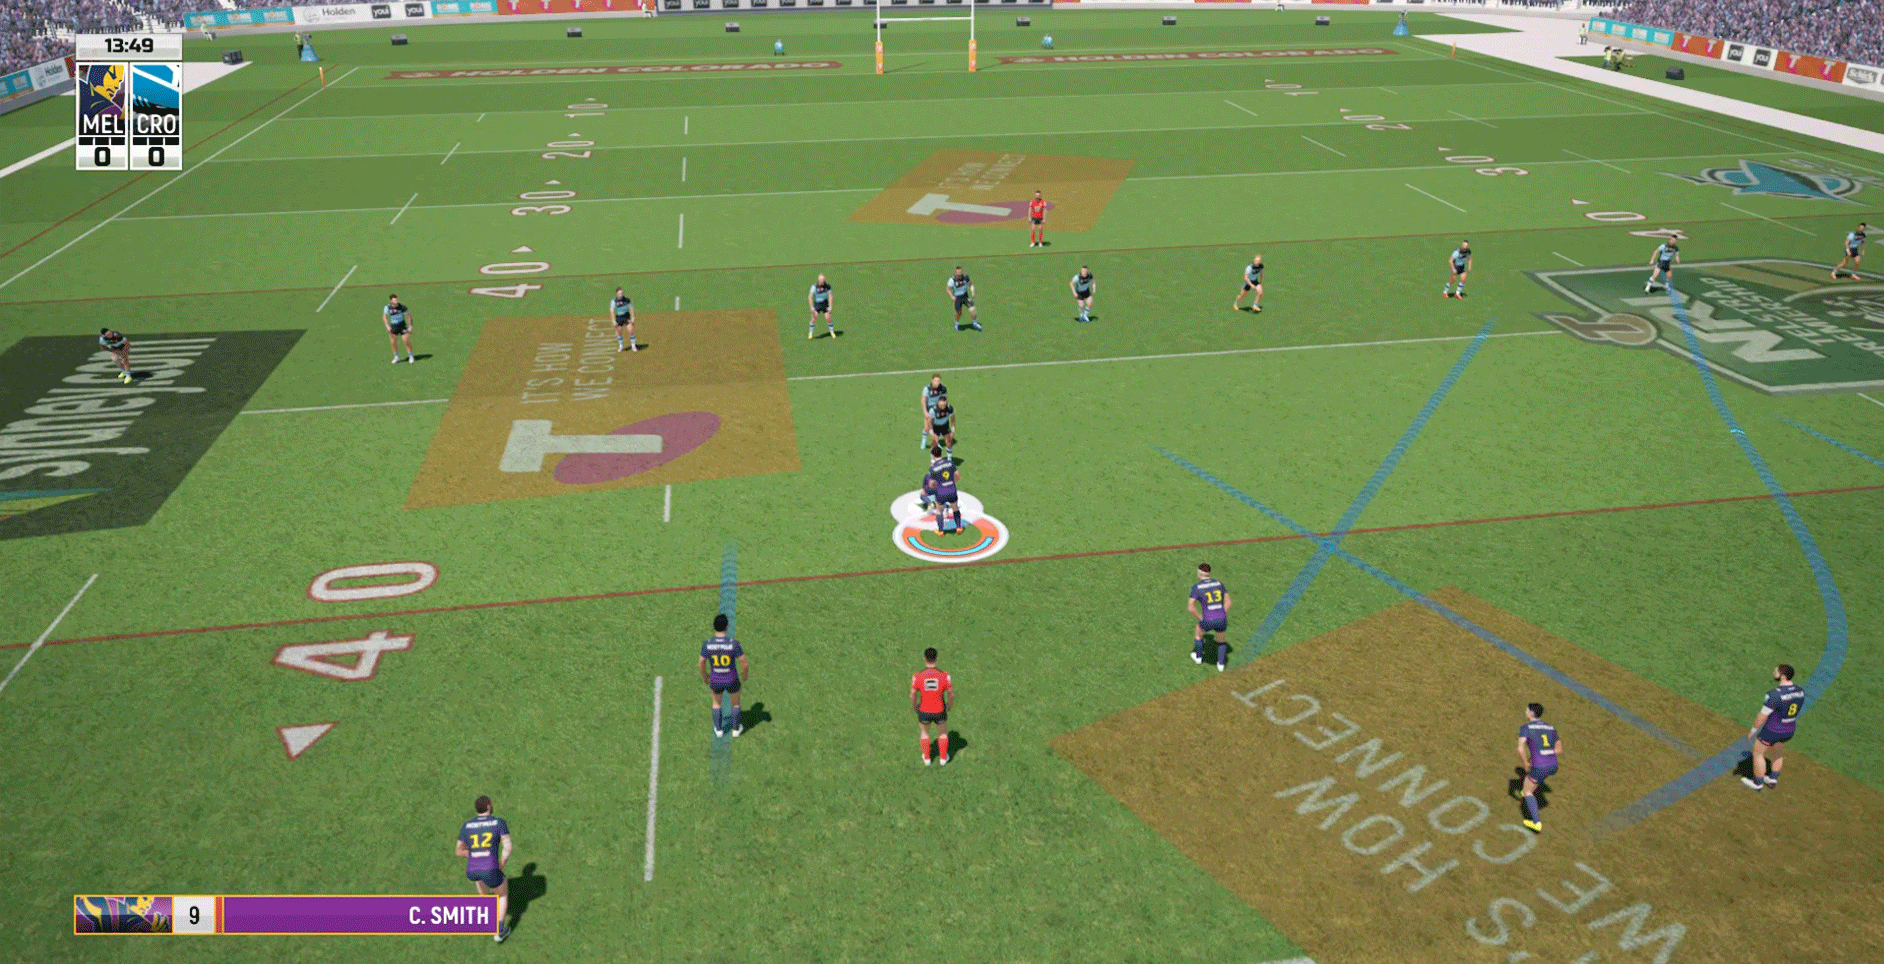 rugby league live 4 ps4